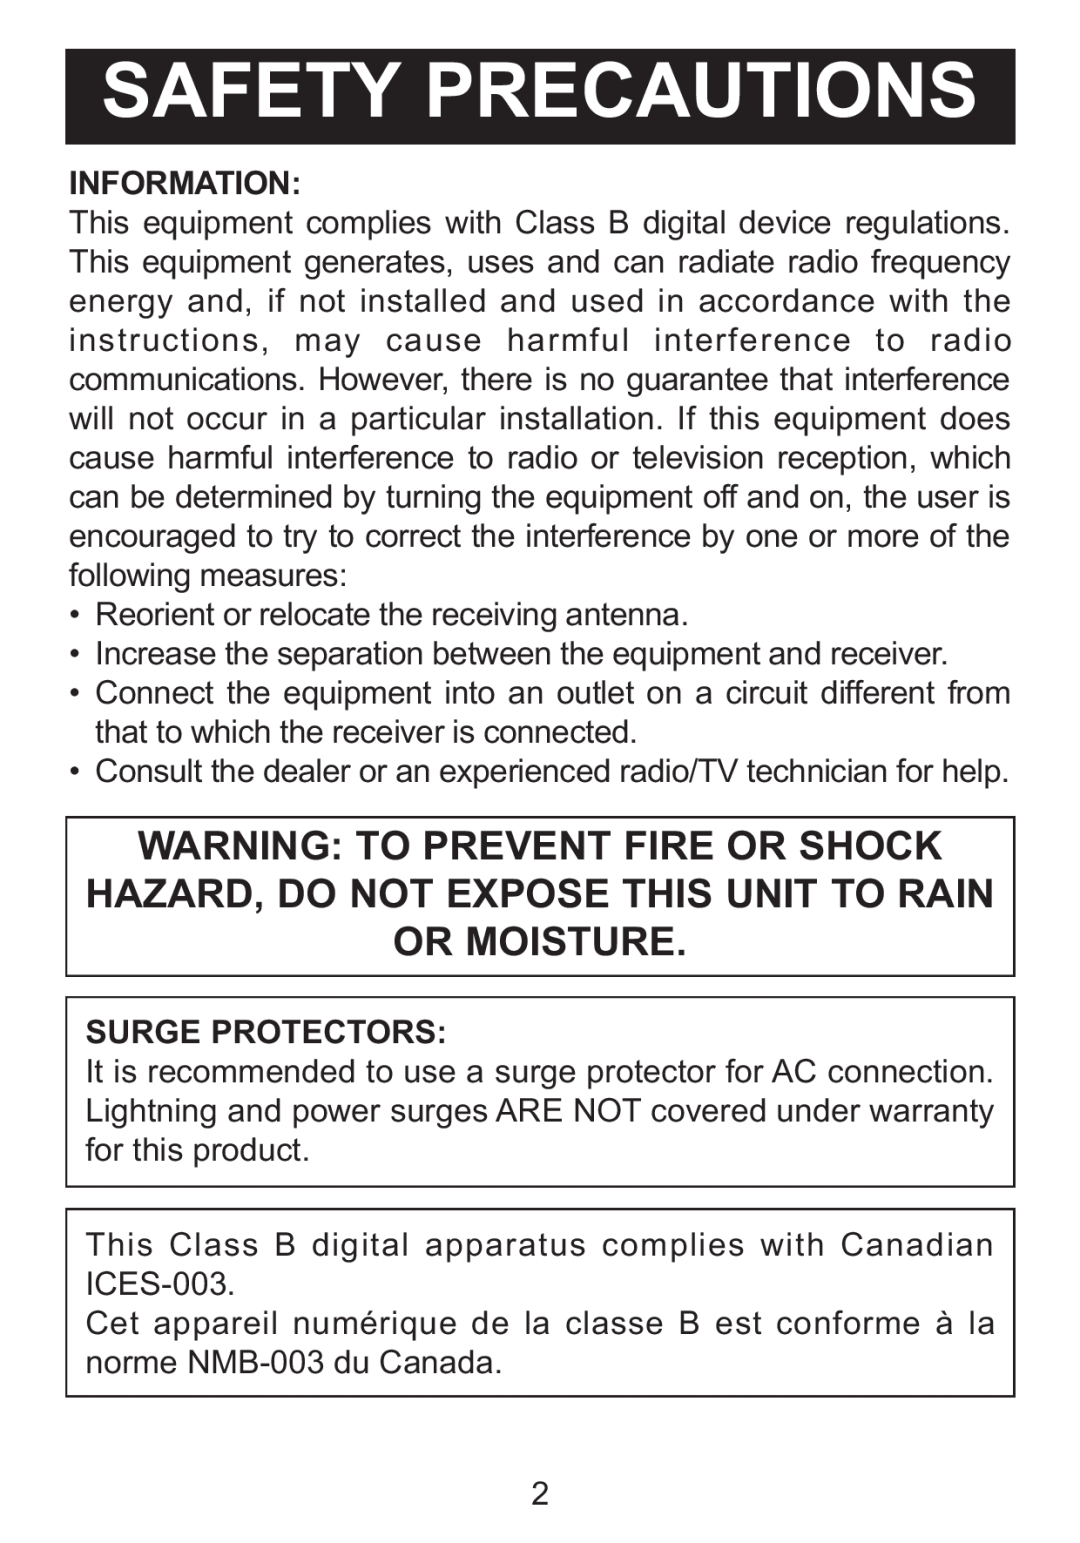 Memorex Mi1006 Safety Precautions, Warning To Prevent Fire Or Shock, Hazard, Do Not Expose This Unit To Rain, Or Moisture 